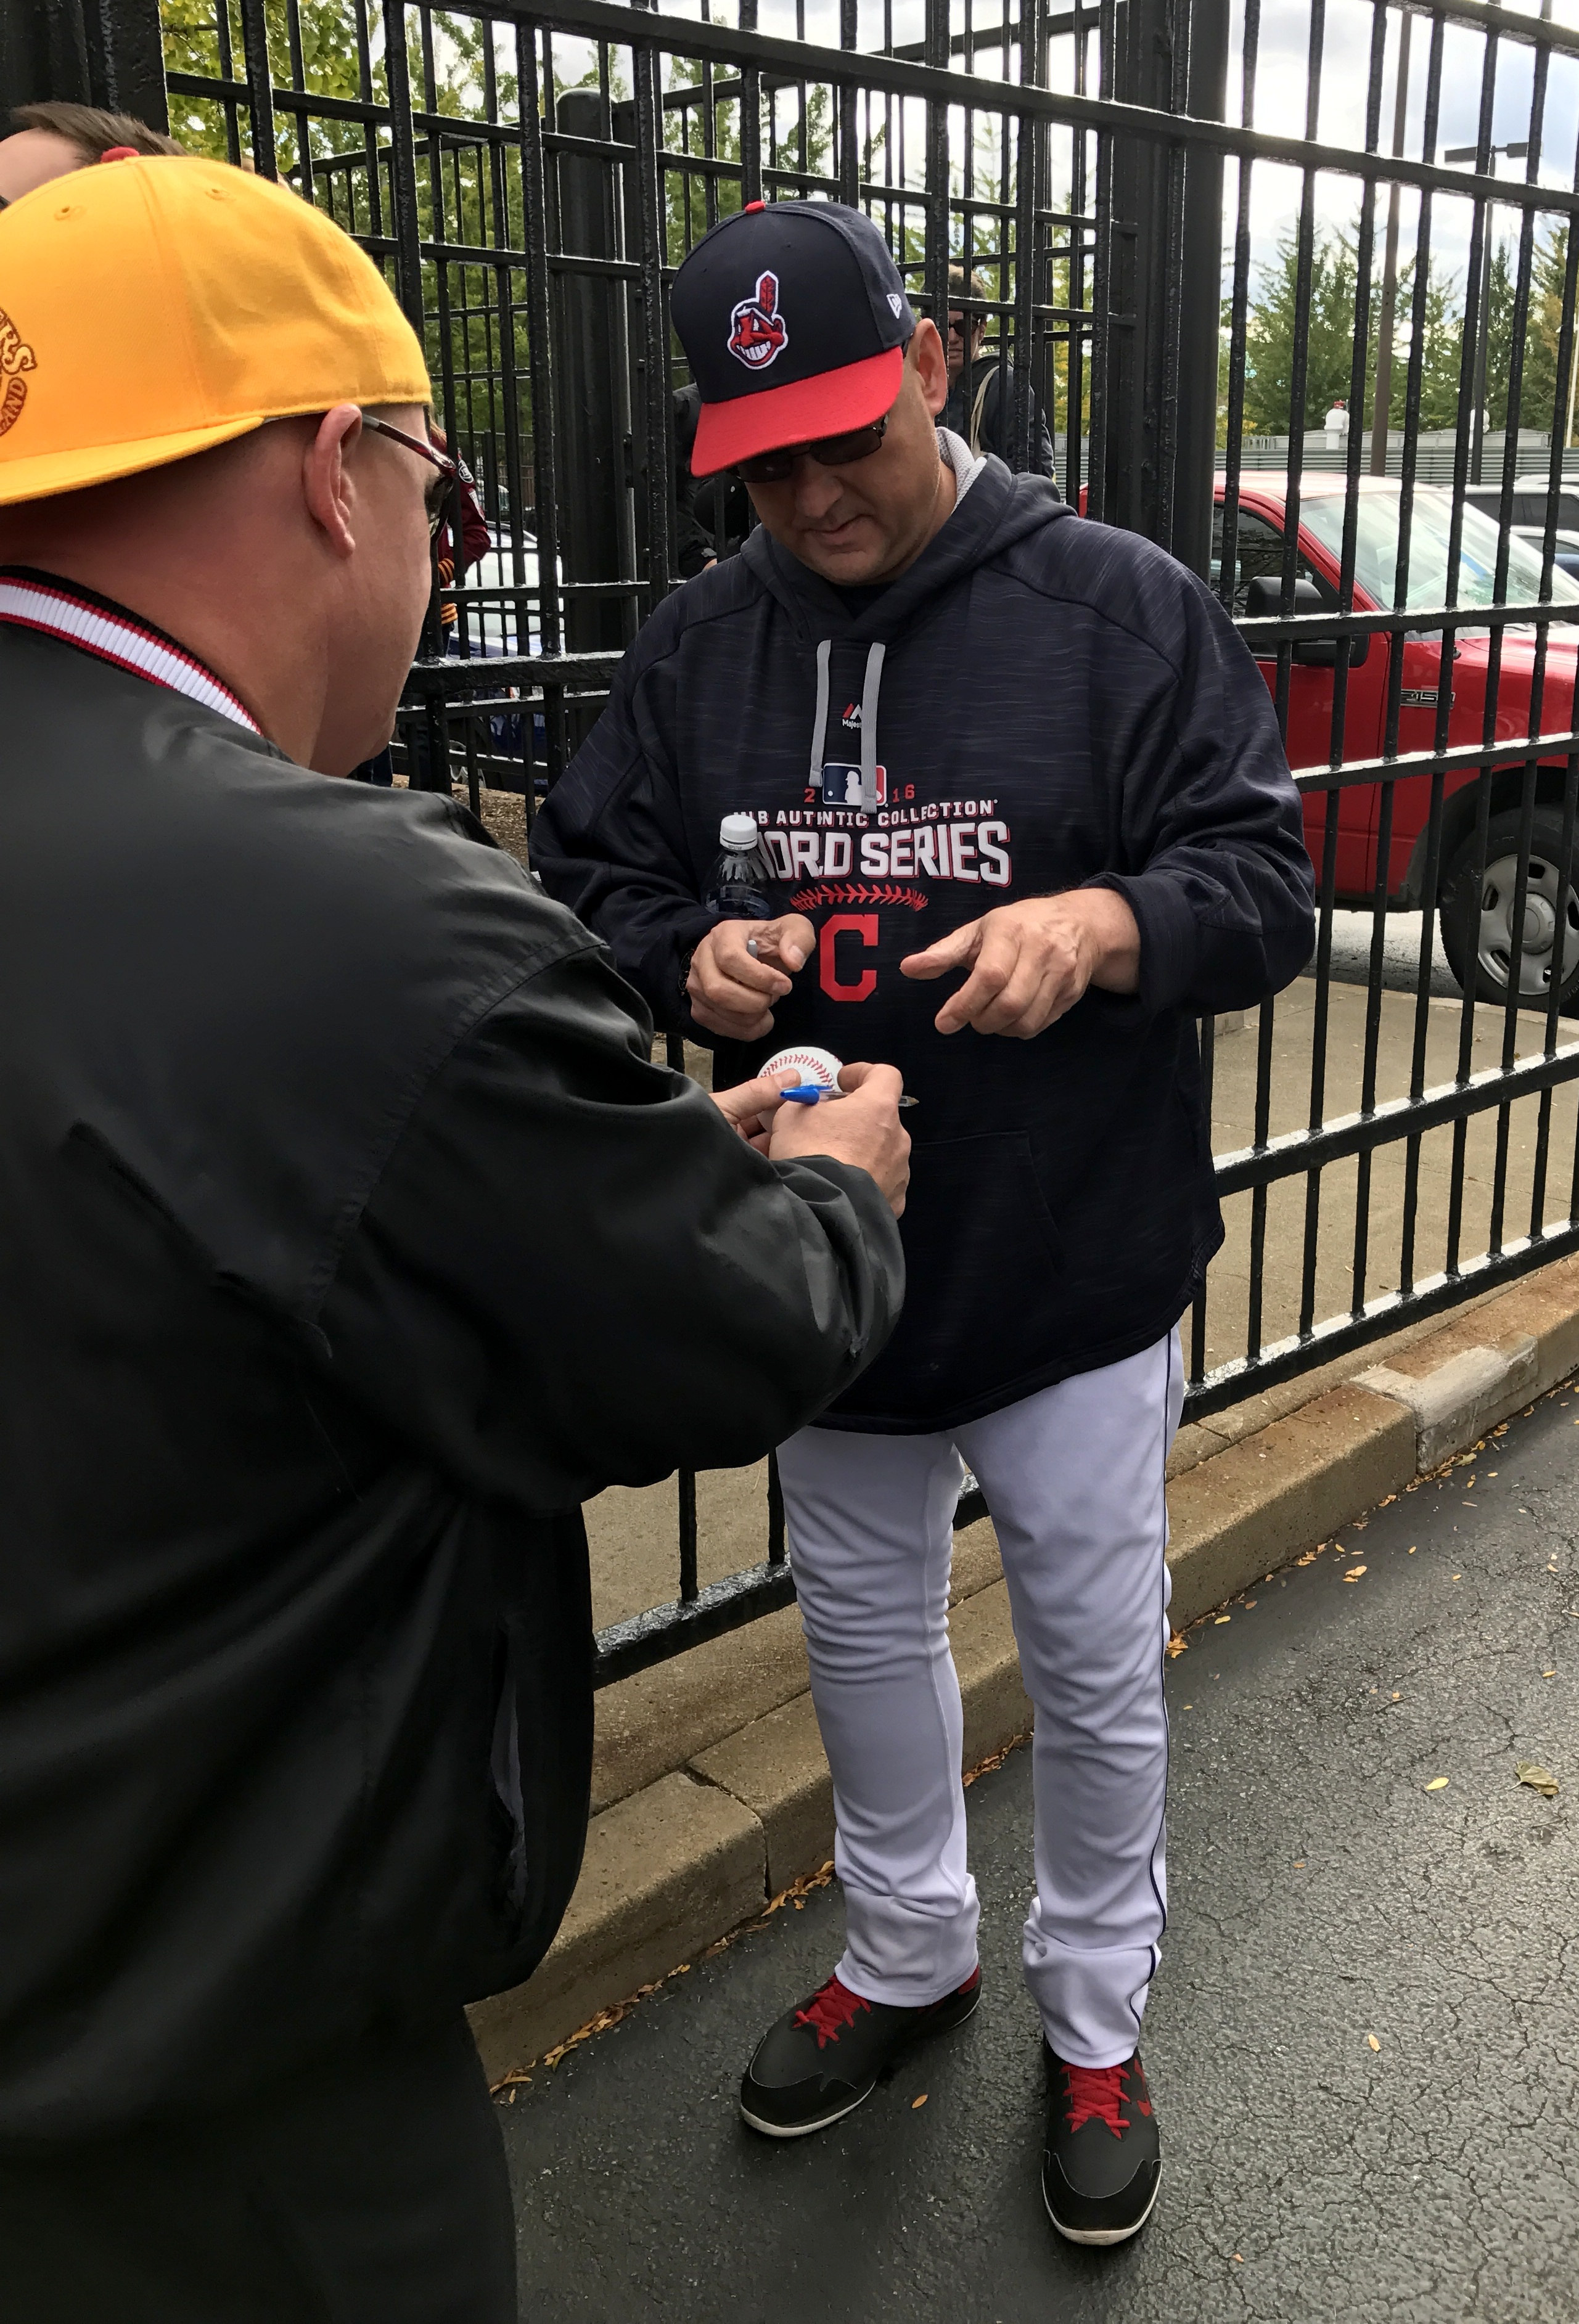 File:Indians skipper Terry Francona signs for fans before -WorldSeries Game  1. (30477228241).jpg - Wikipedia